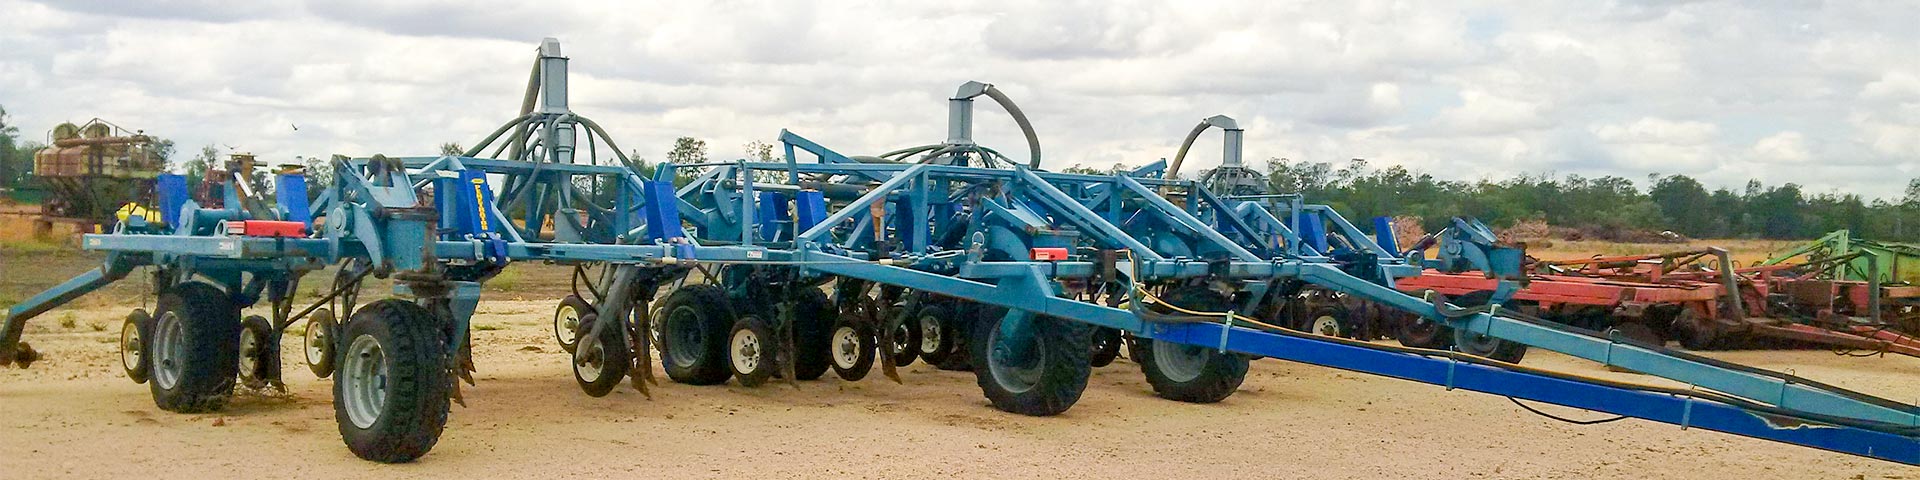 Agricultural Consignment Machinery examples